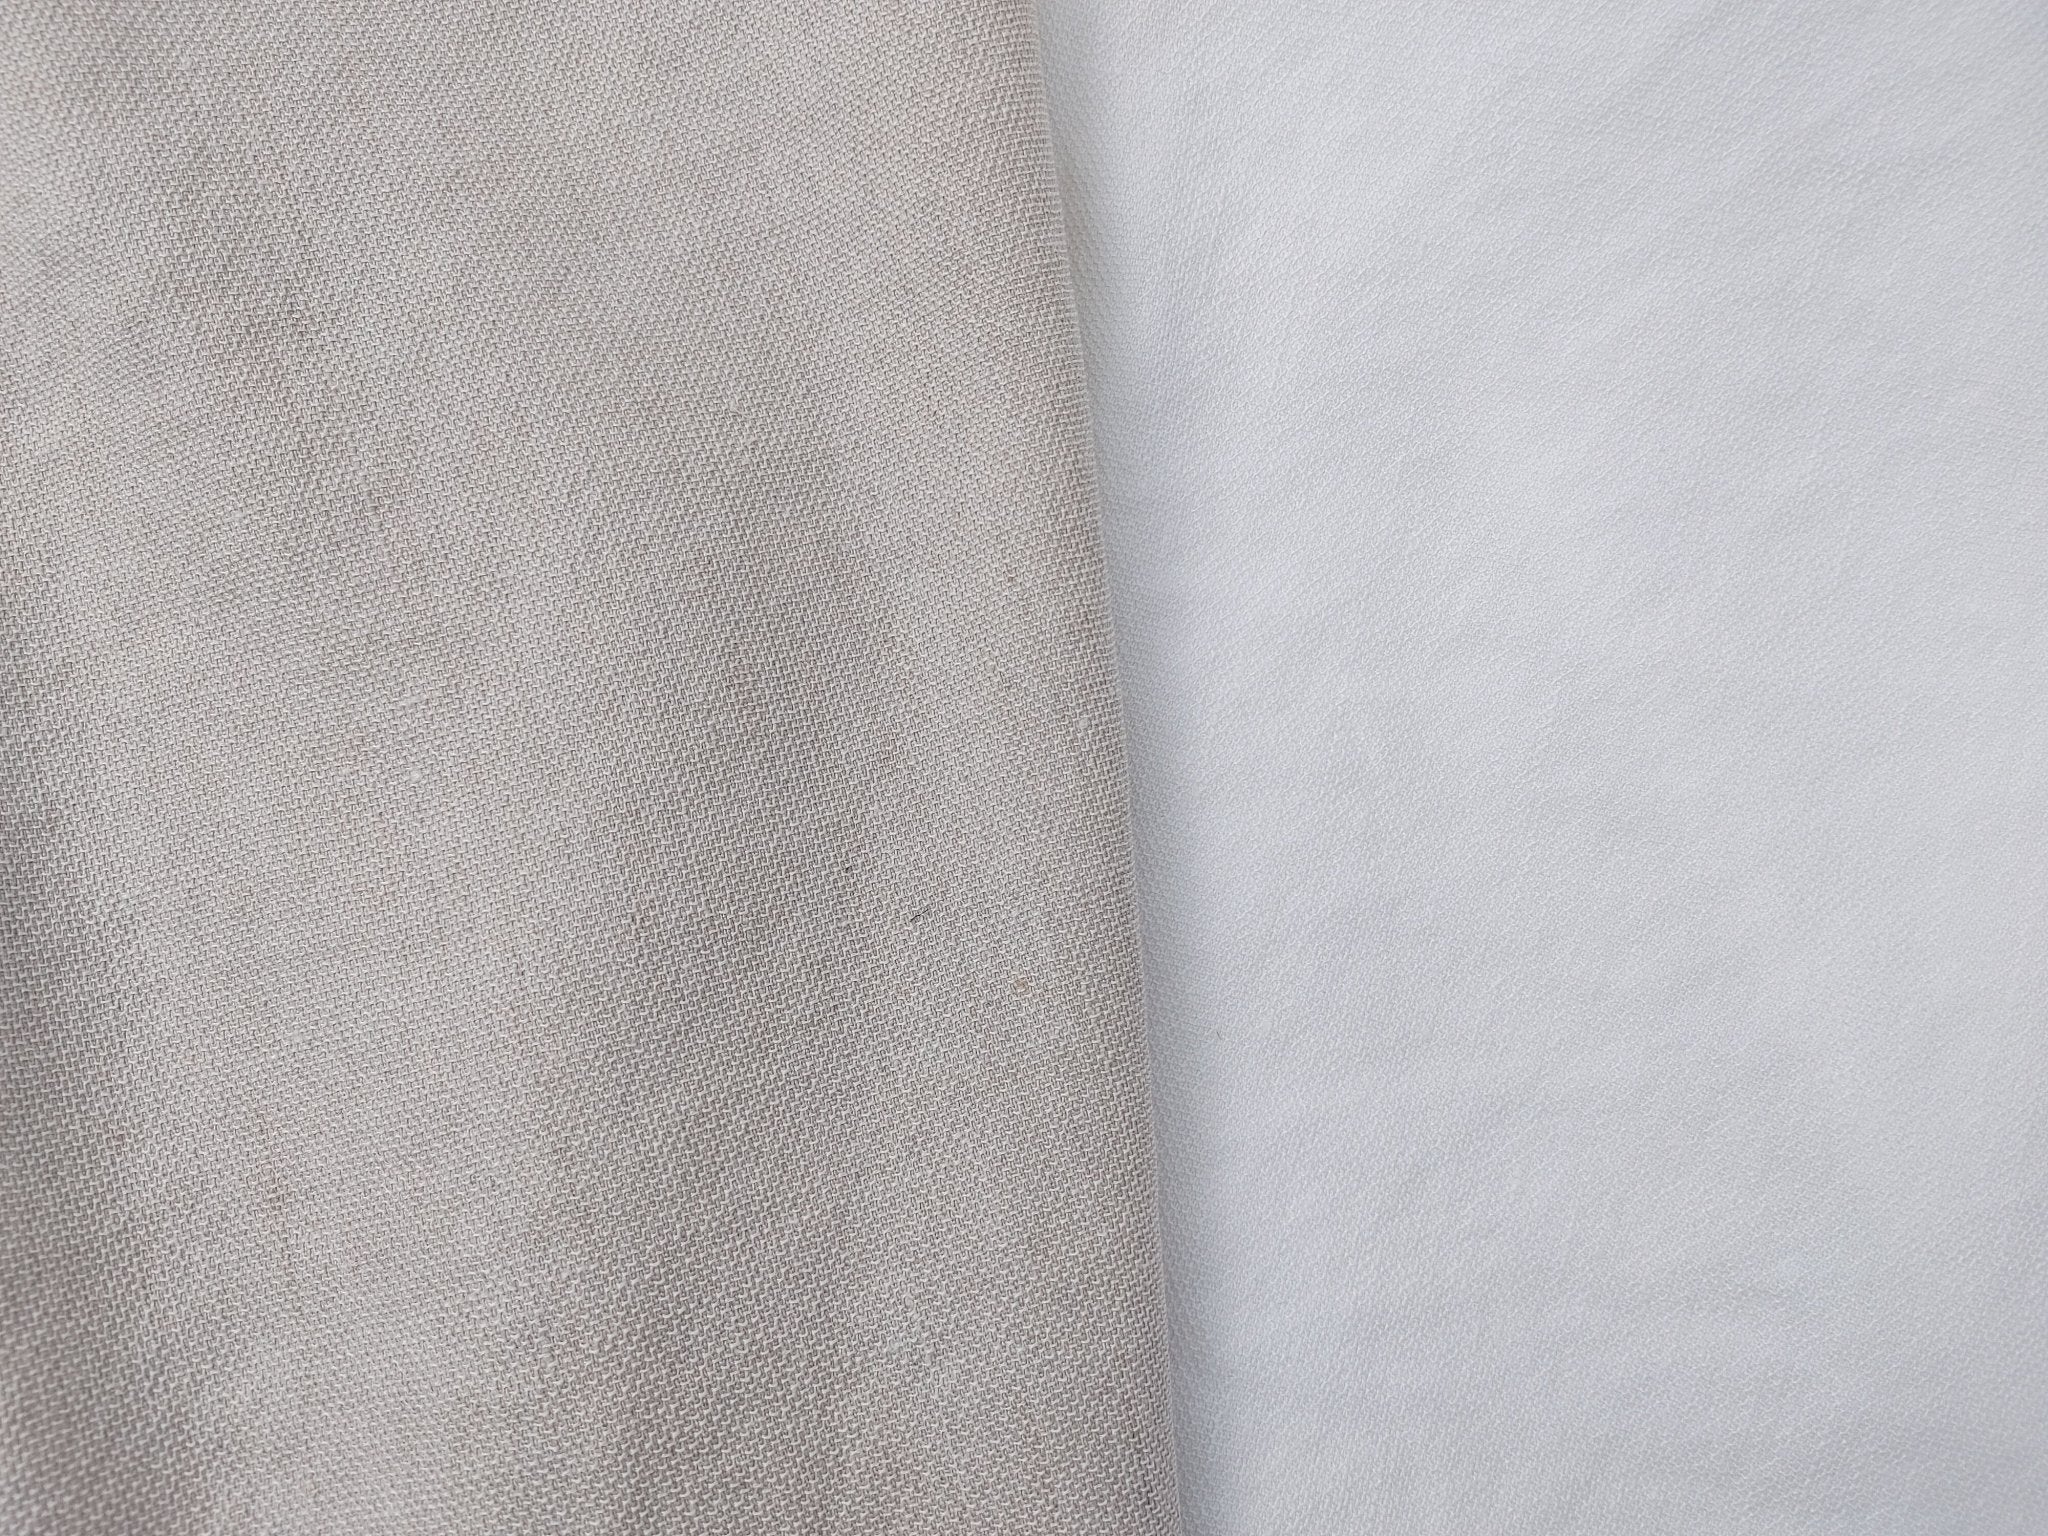 Linen Rayon PU Stretch Dobby Weave Fabric 6643 6644 - The Linen Lab - White